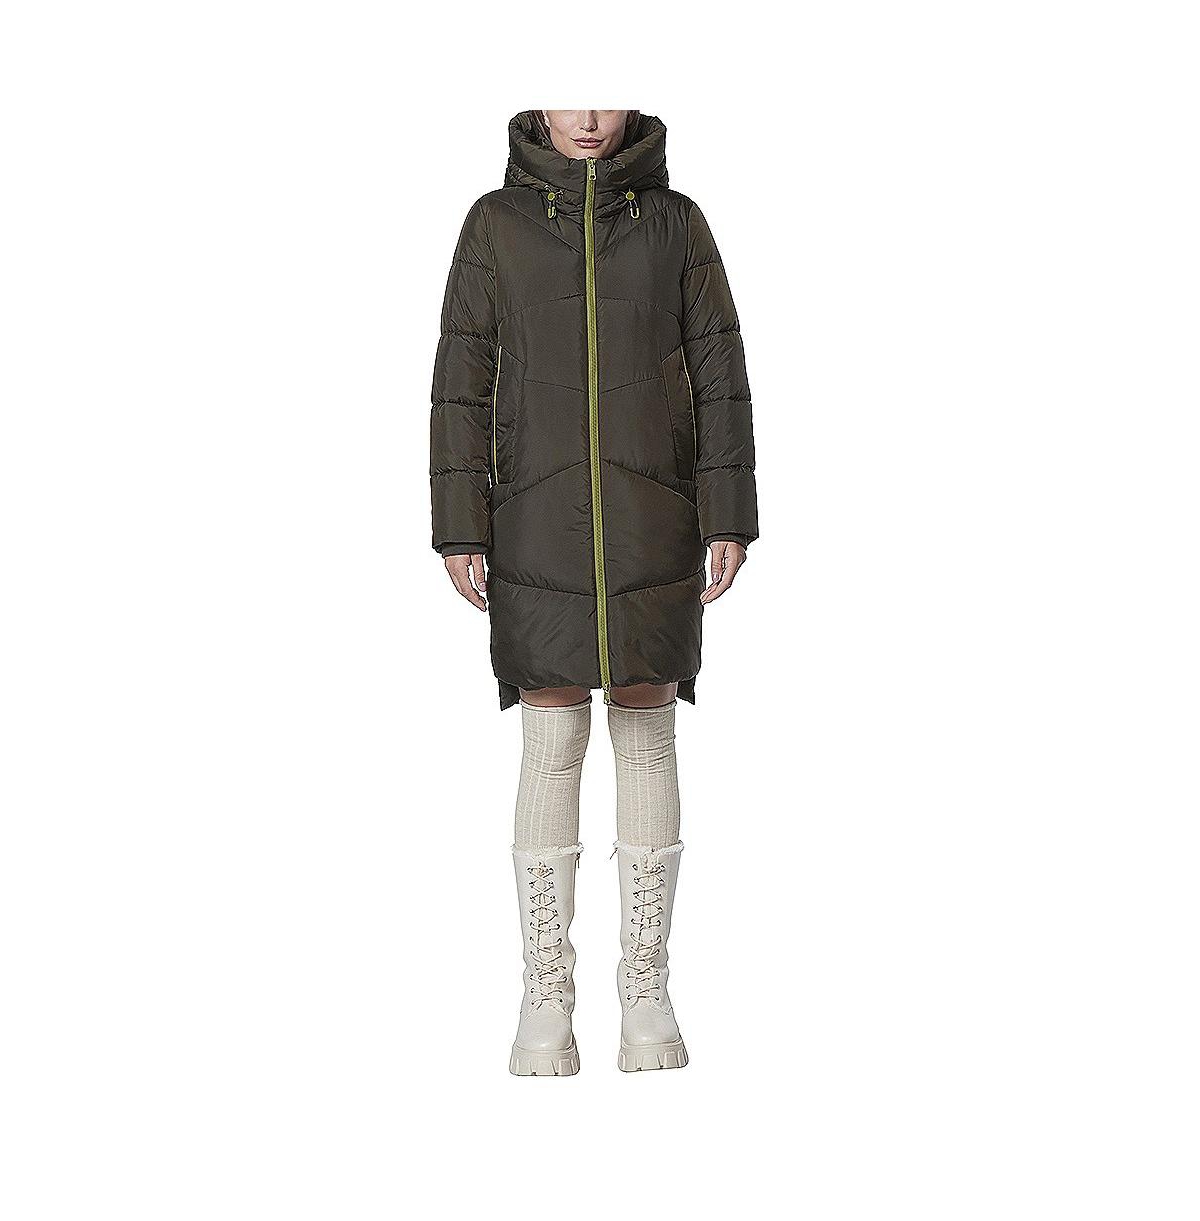 Women's Baisley Hooded Parka Puffer With A High/Low Hem - Black